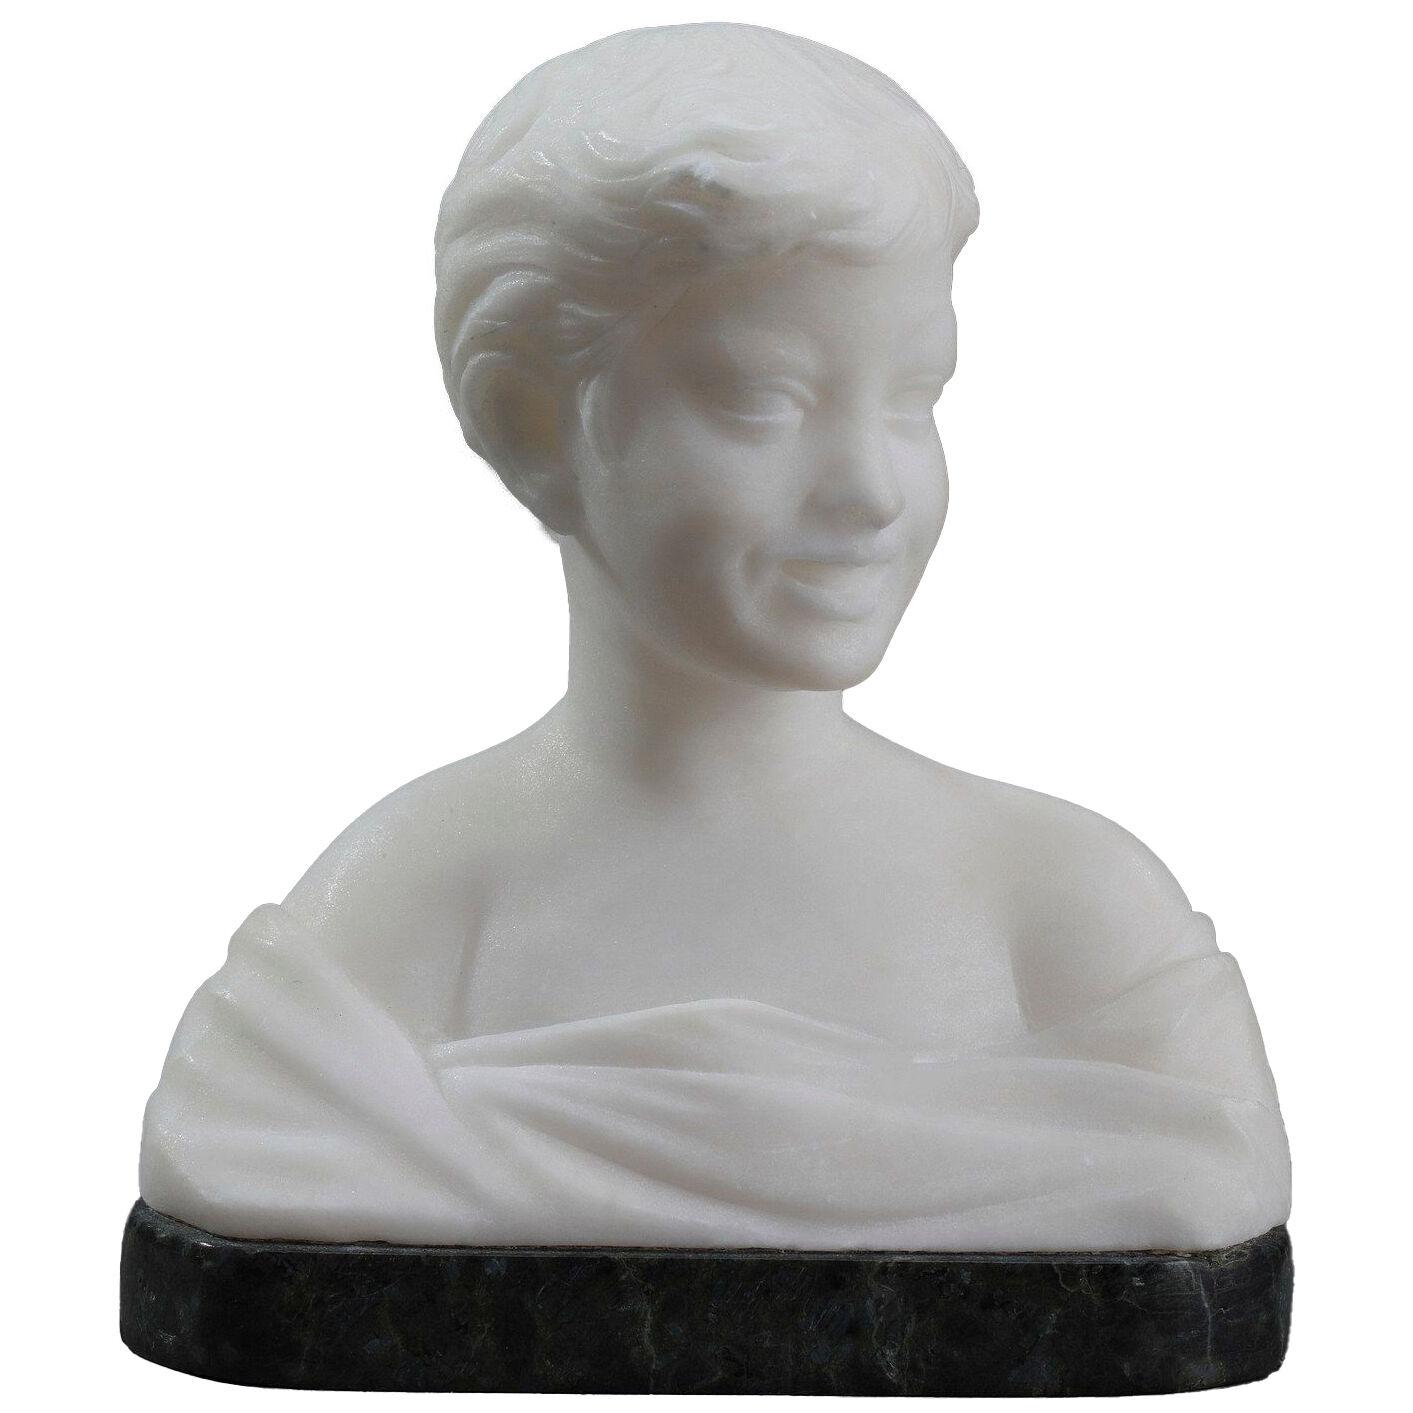 Small bust representing a young boy in alabaster